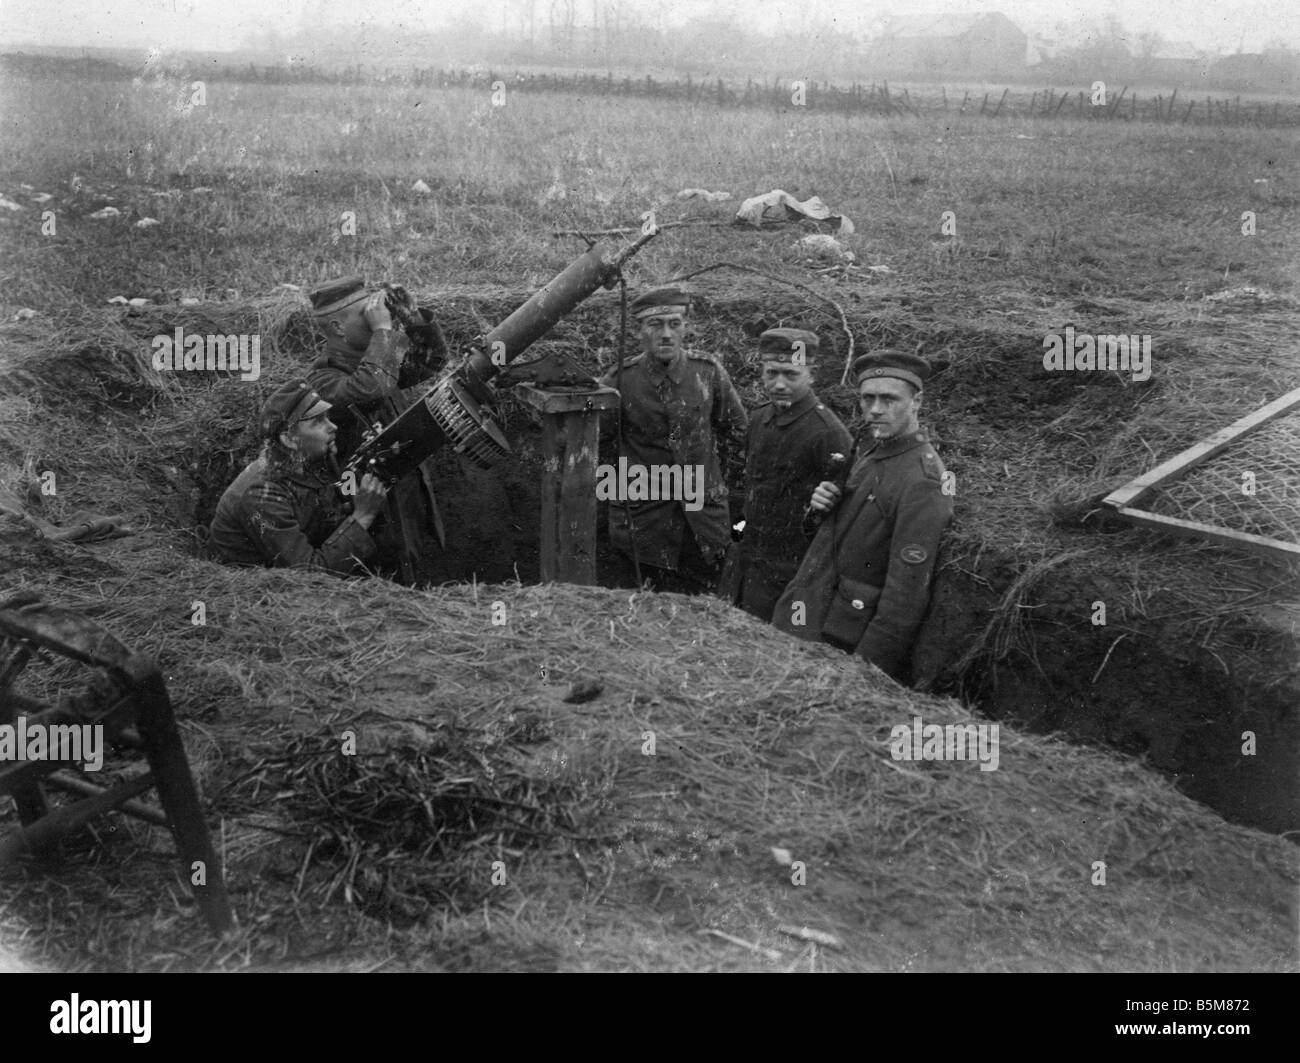 2 G55 B1 1918 2 WWI German air raid defence Photo 1918 History WWI Aerial warfare Air raid defence German machine gunners in a t Stock Photo